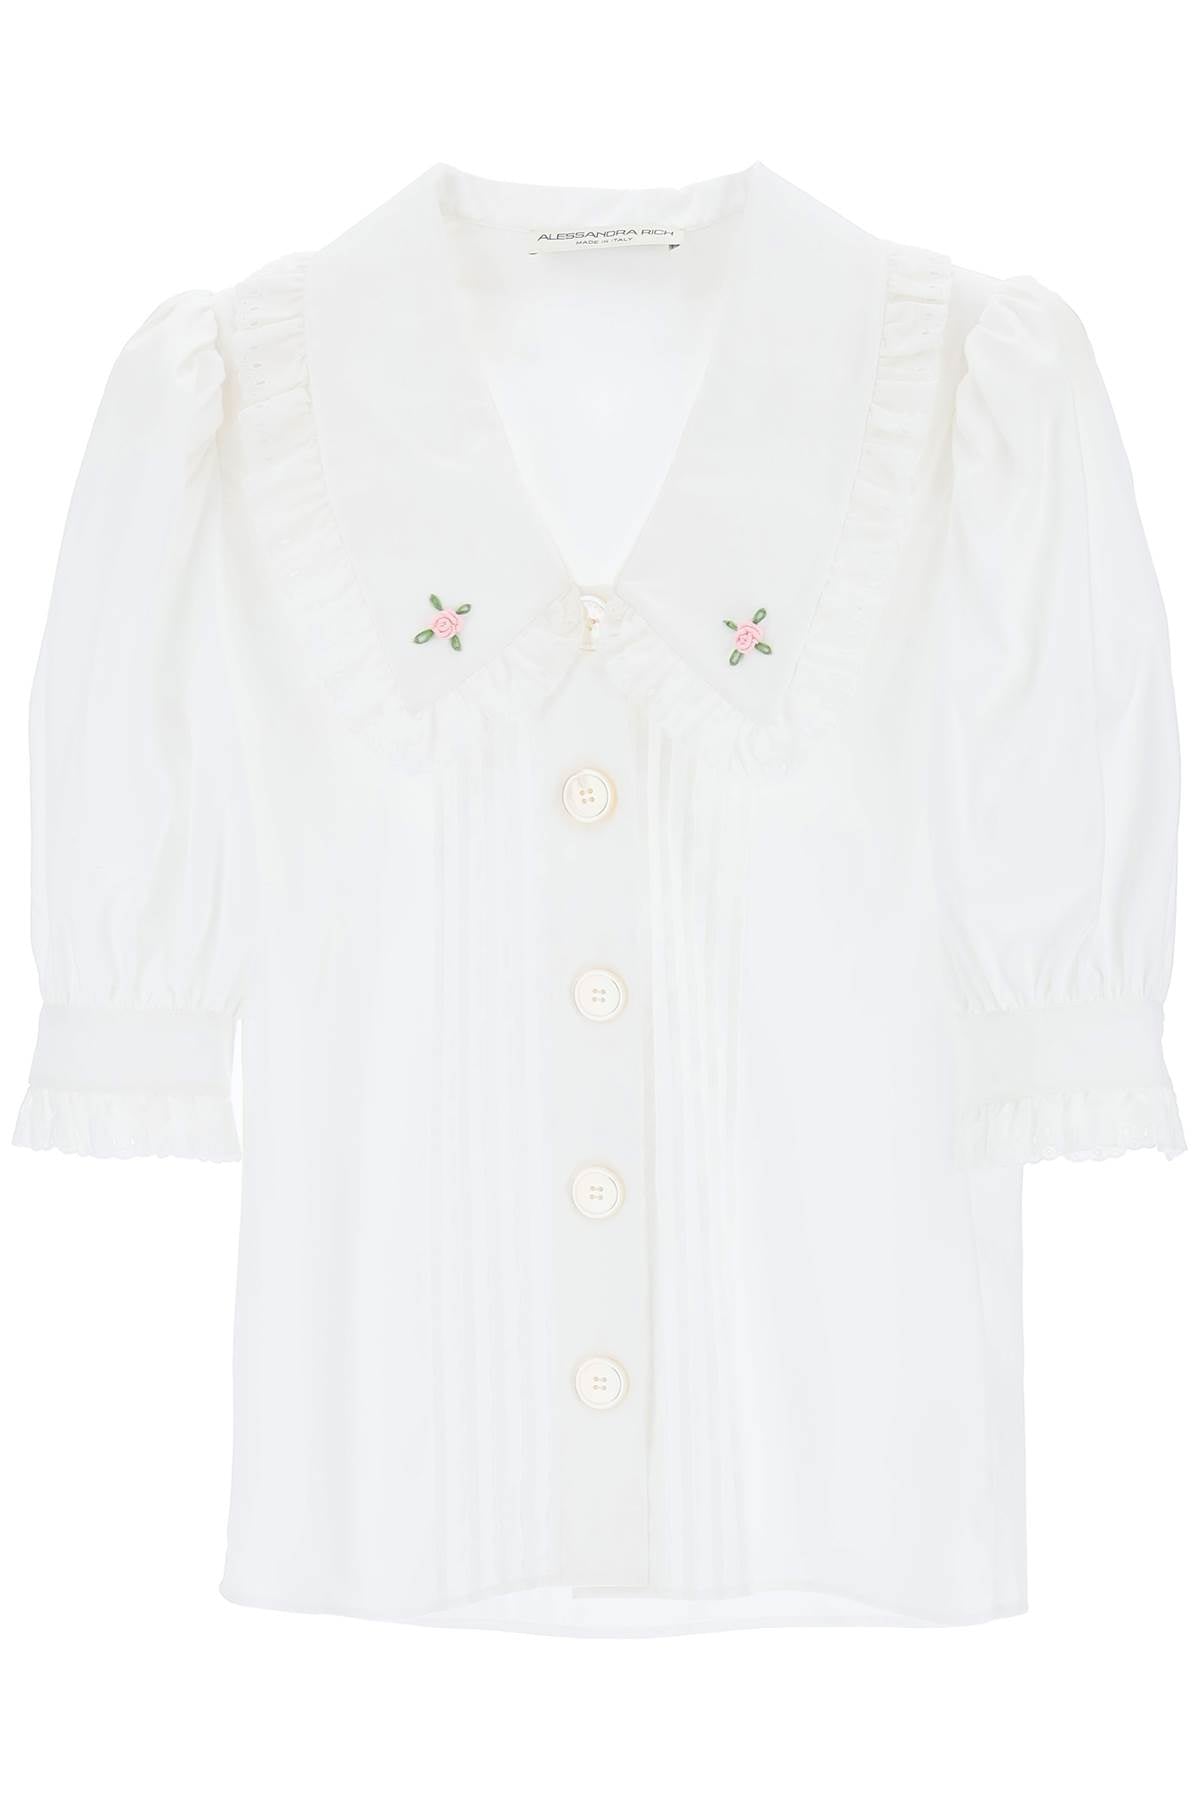 Alessandra rich short-sleeved shirt with embroidered collar-women > clothing > shirts and blouses > shirts-Alessandra Rich-40-White-Urbanheer